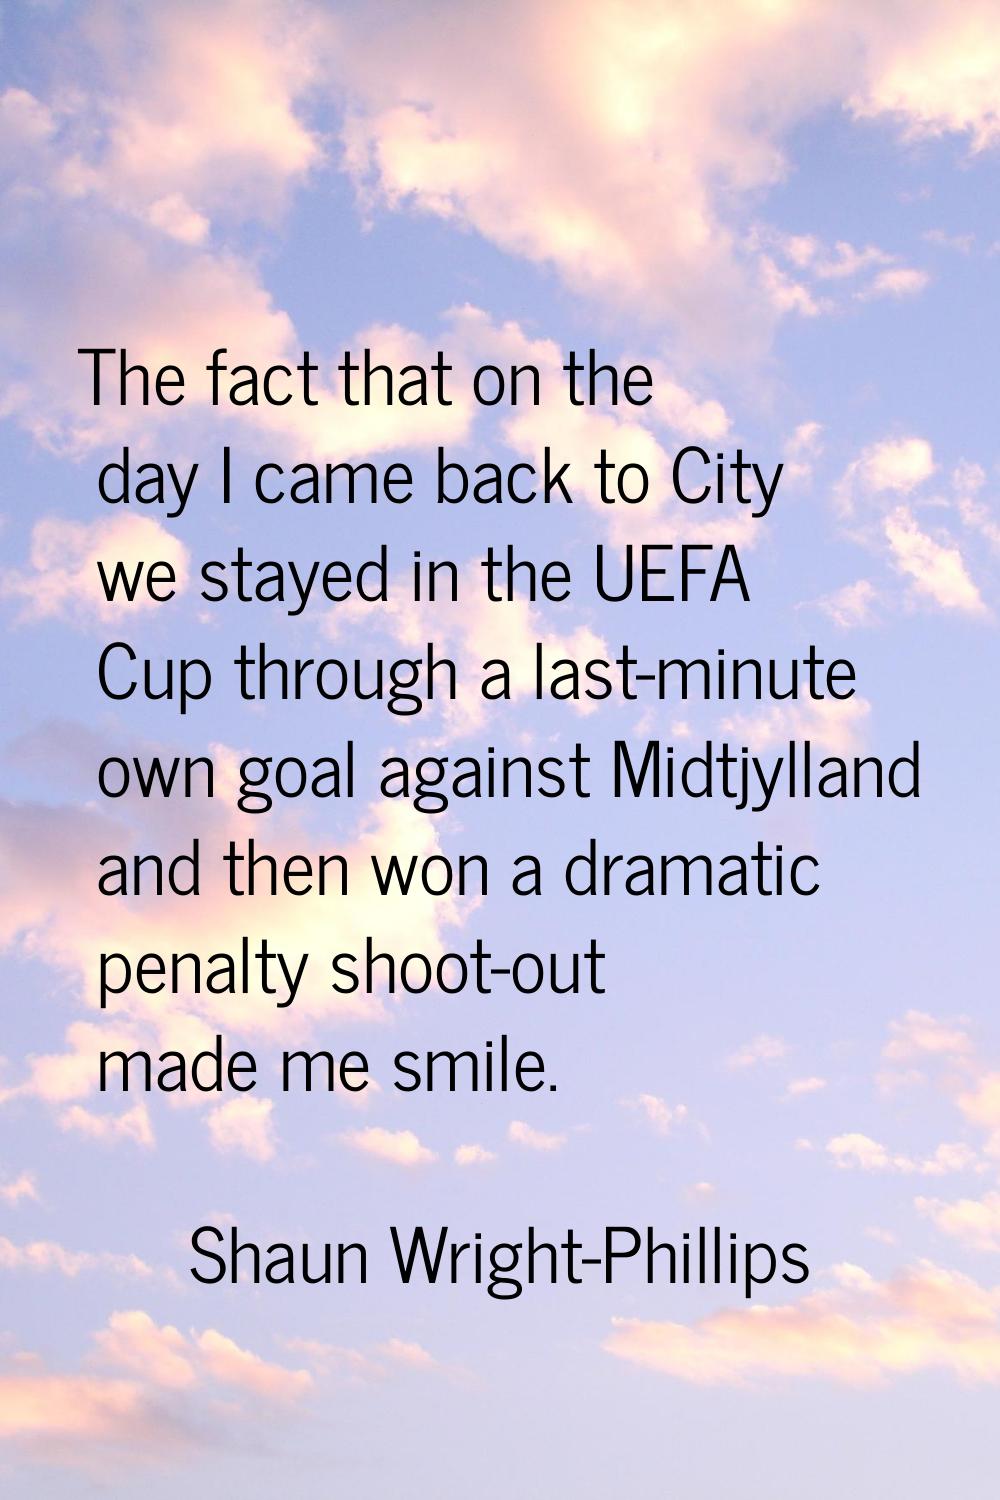 The fact that on the day I came back to City we stayed in the UEFA Cup through a last-minute own go